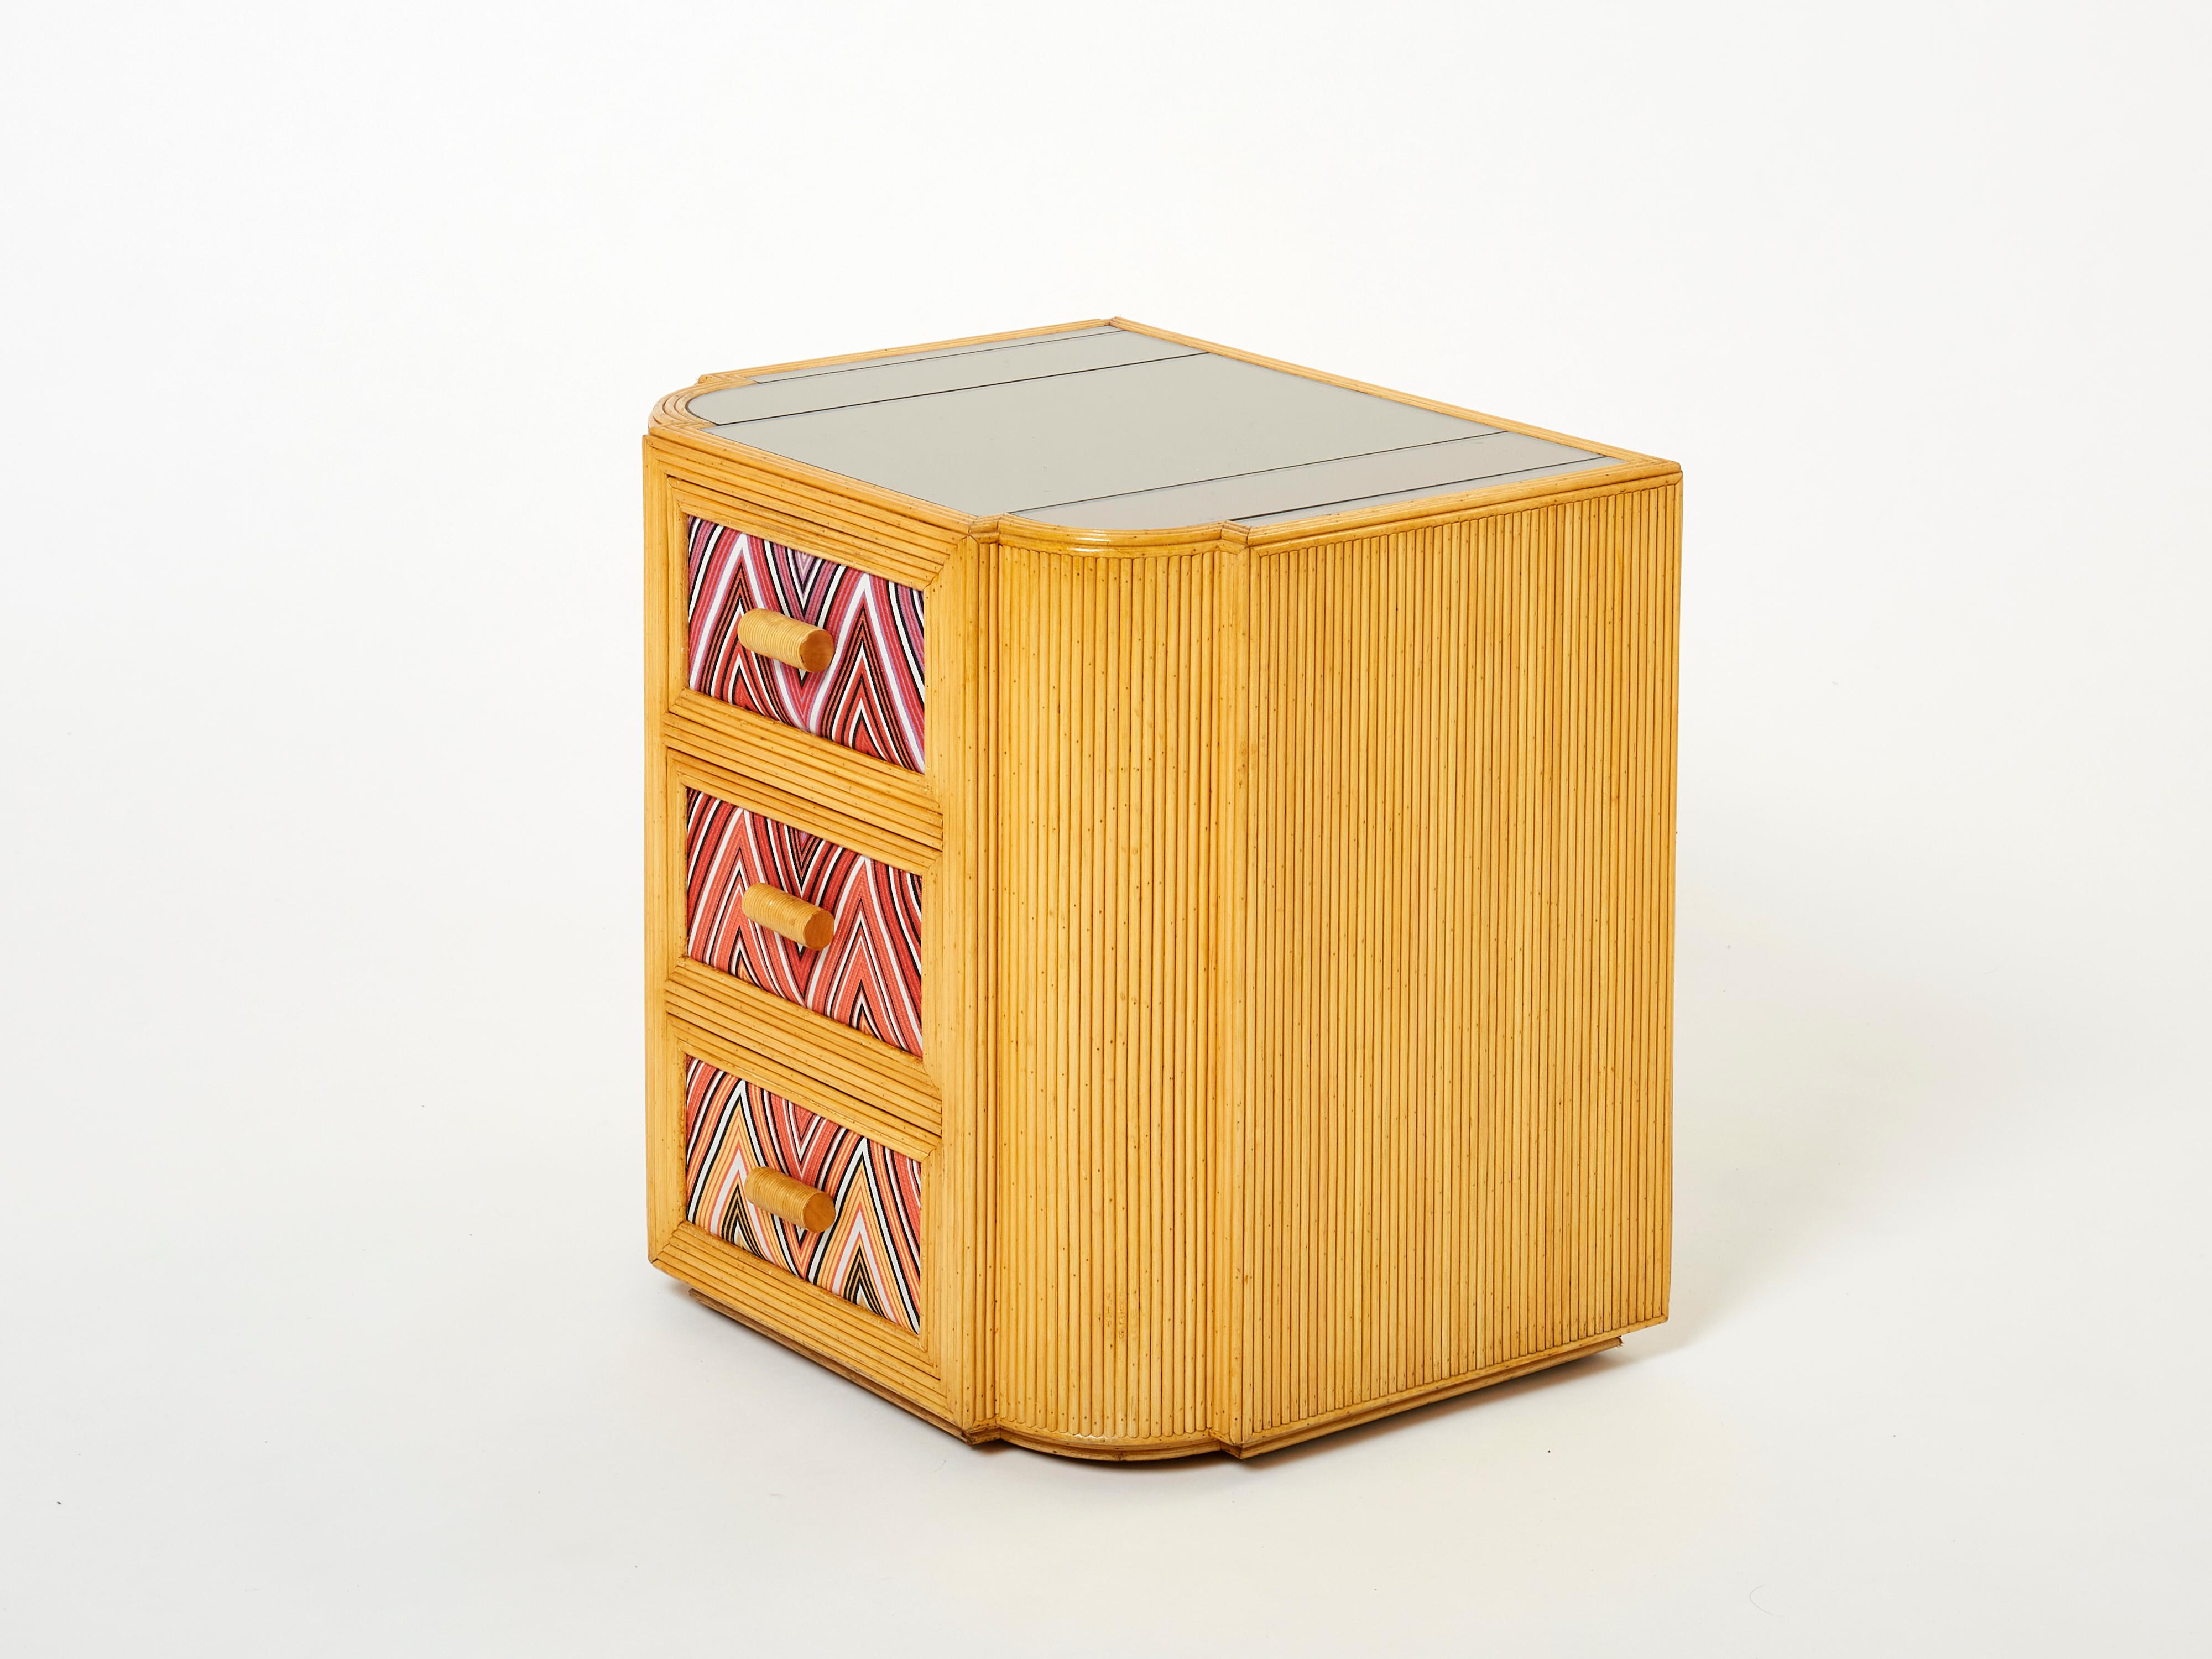 Pair of Italian Vivai del Sud Bamboo Missoni Fabric Night Stands, 1970s For Sale 3